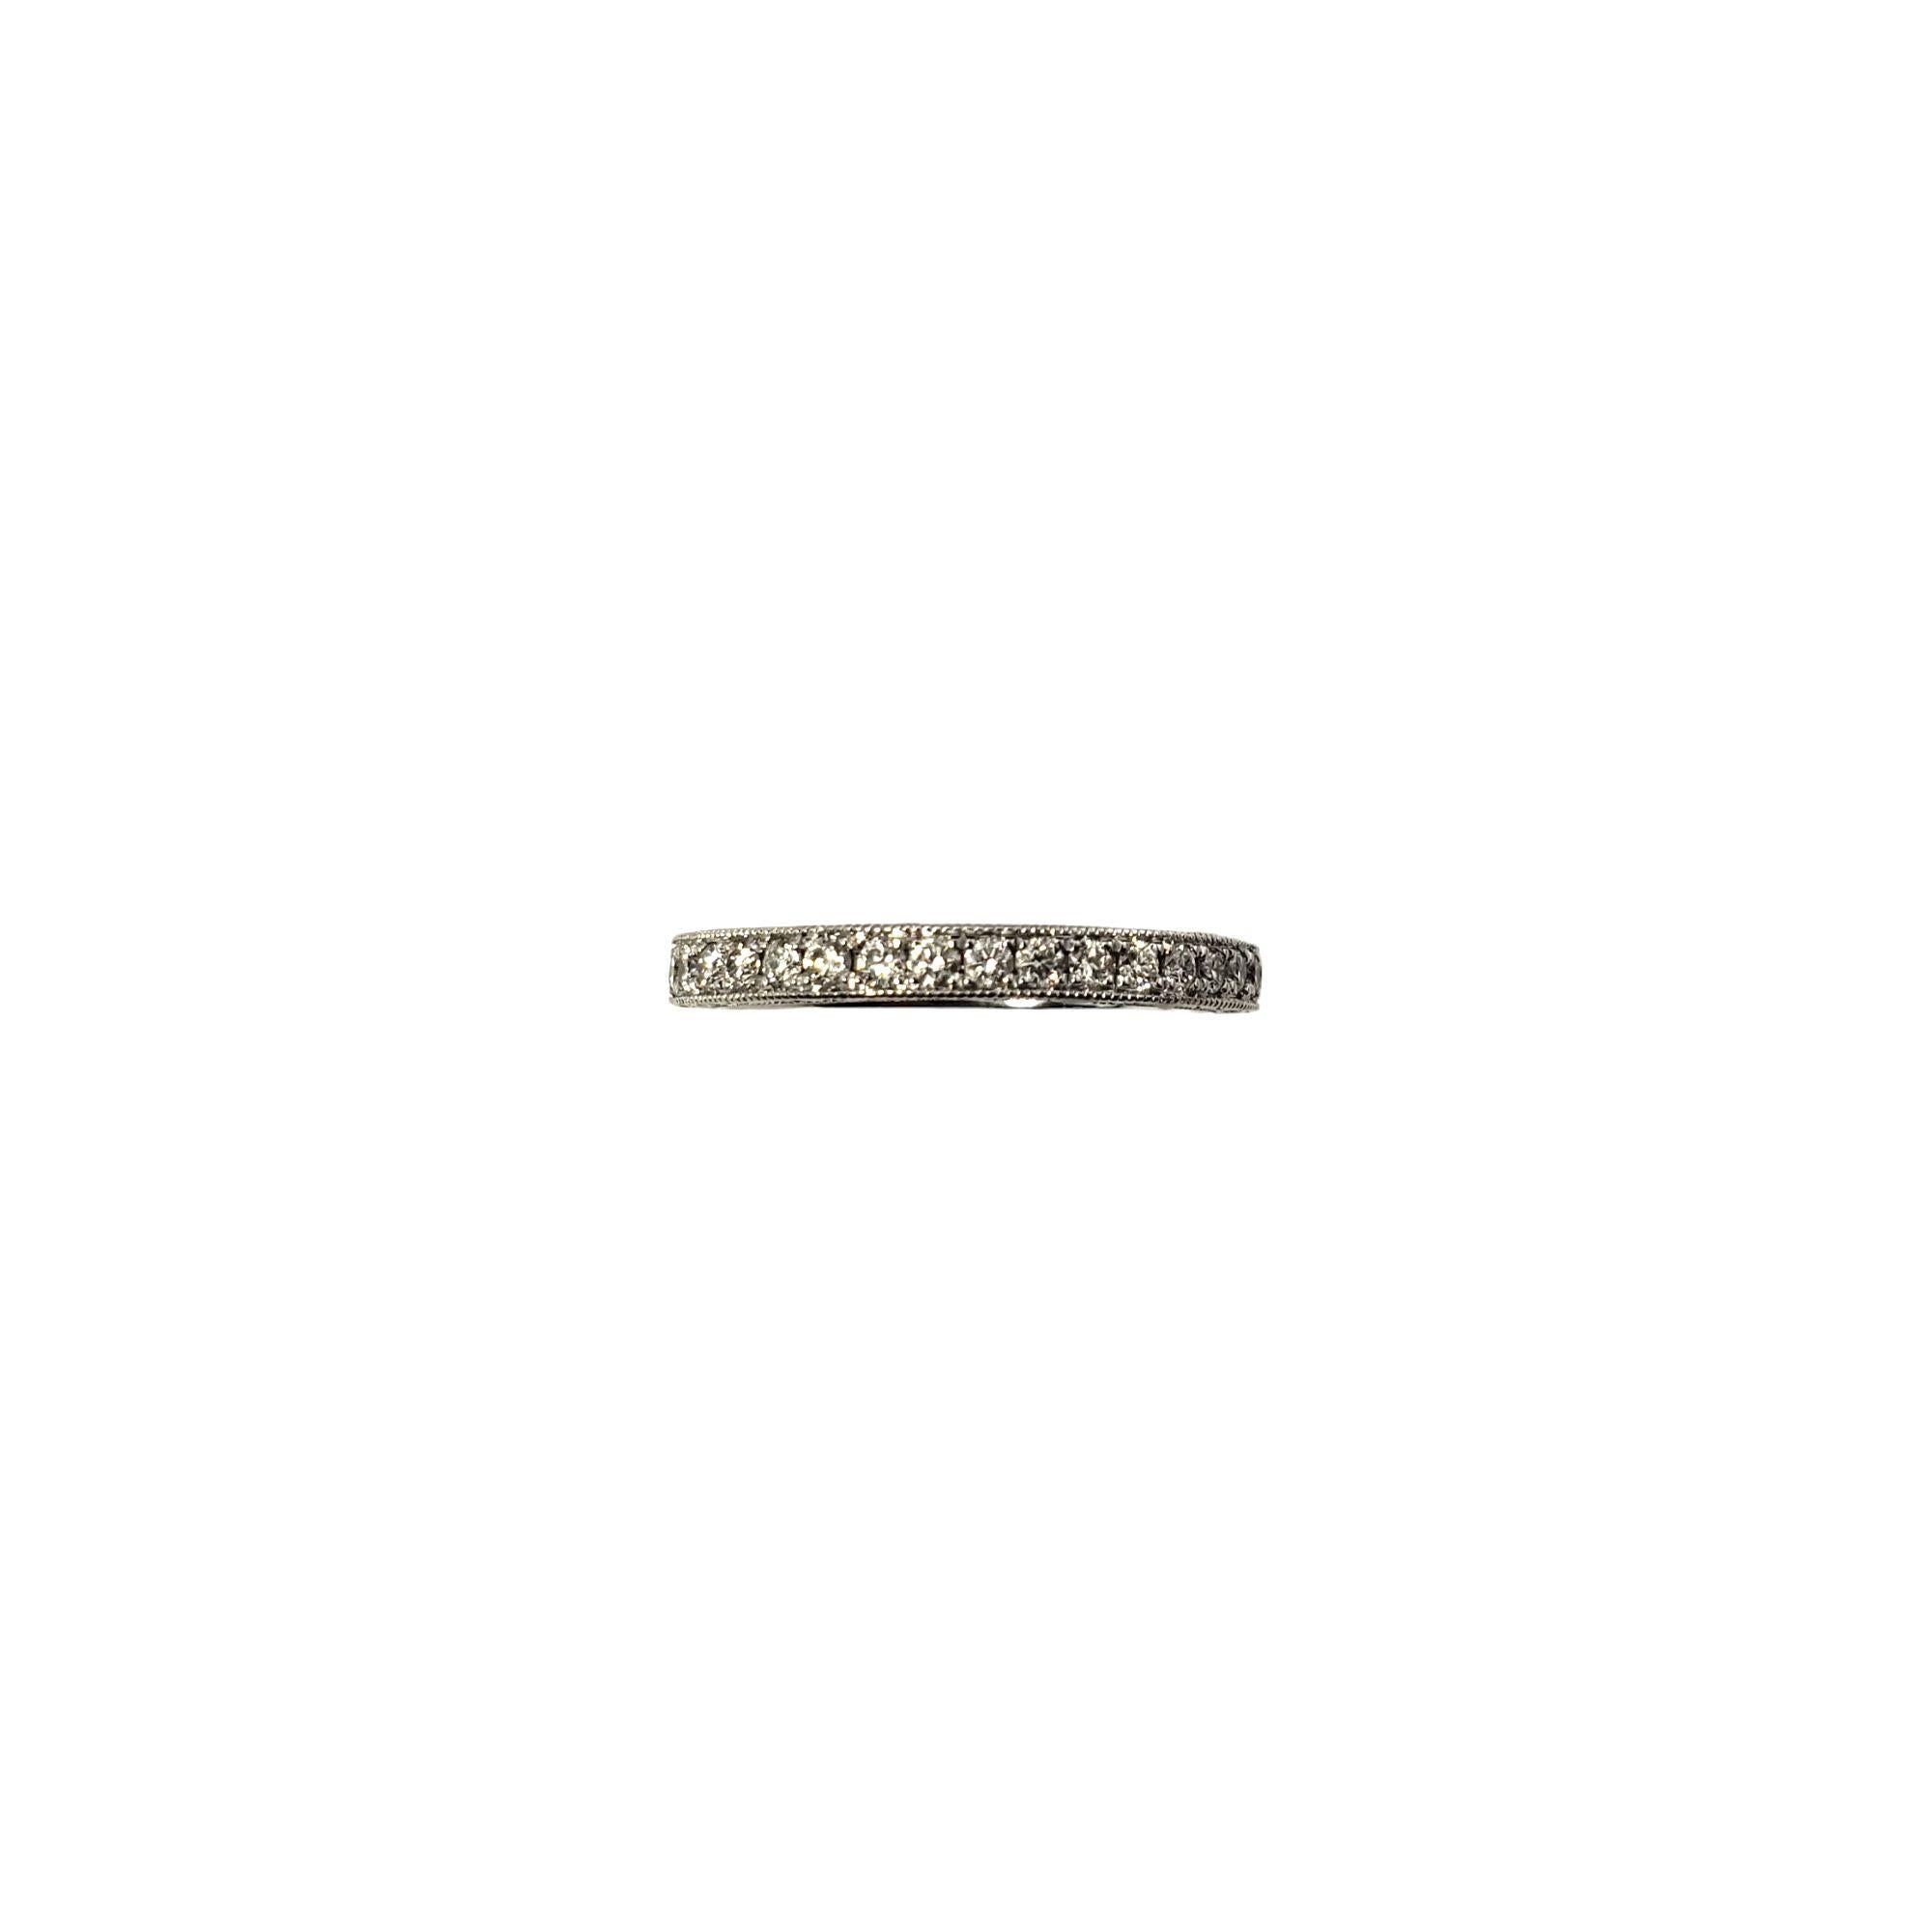 Vintage Neil Lane 14 Karat White Gold and Diamond Band Ring Size 5.75-

This sparkling band features 23 round brilliant cut diamonds set in beautifully detailed 14K white gold. Width: 2 mm.

Approximate total diamond weight: .46 ct.

Diamond